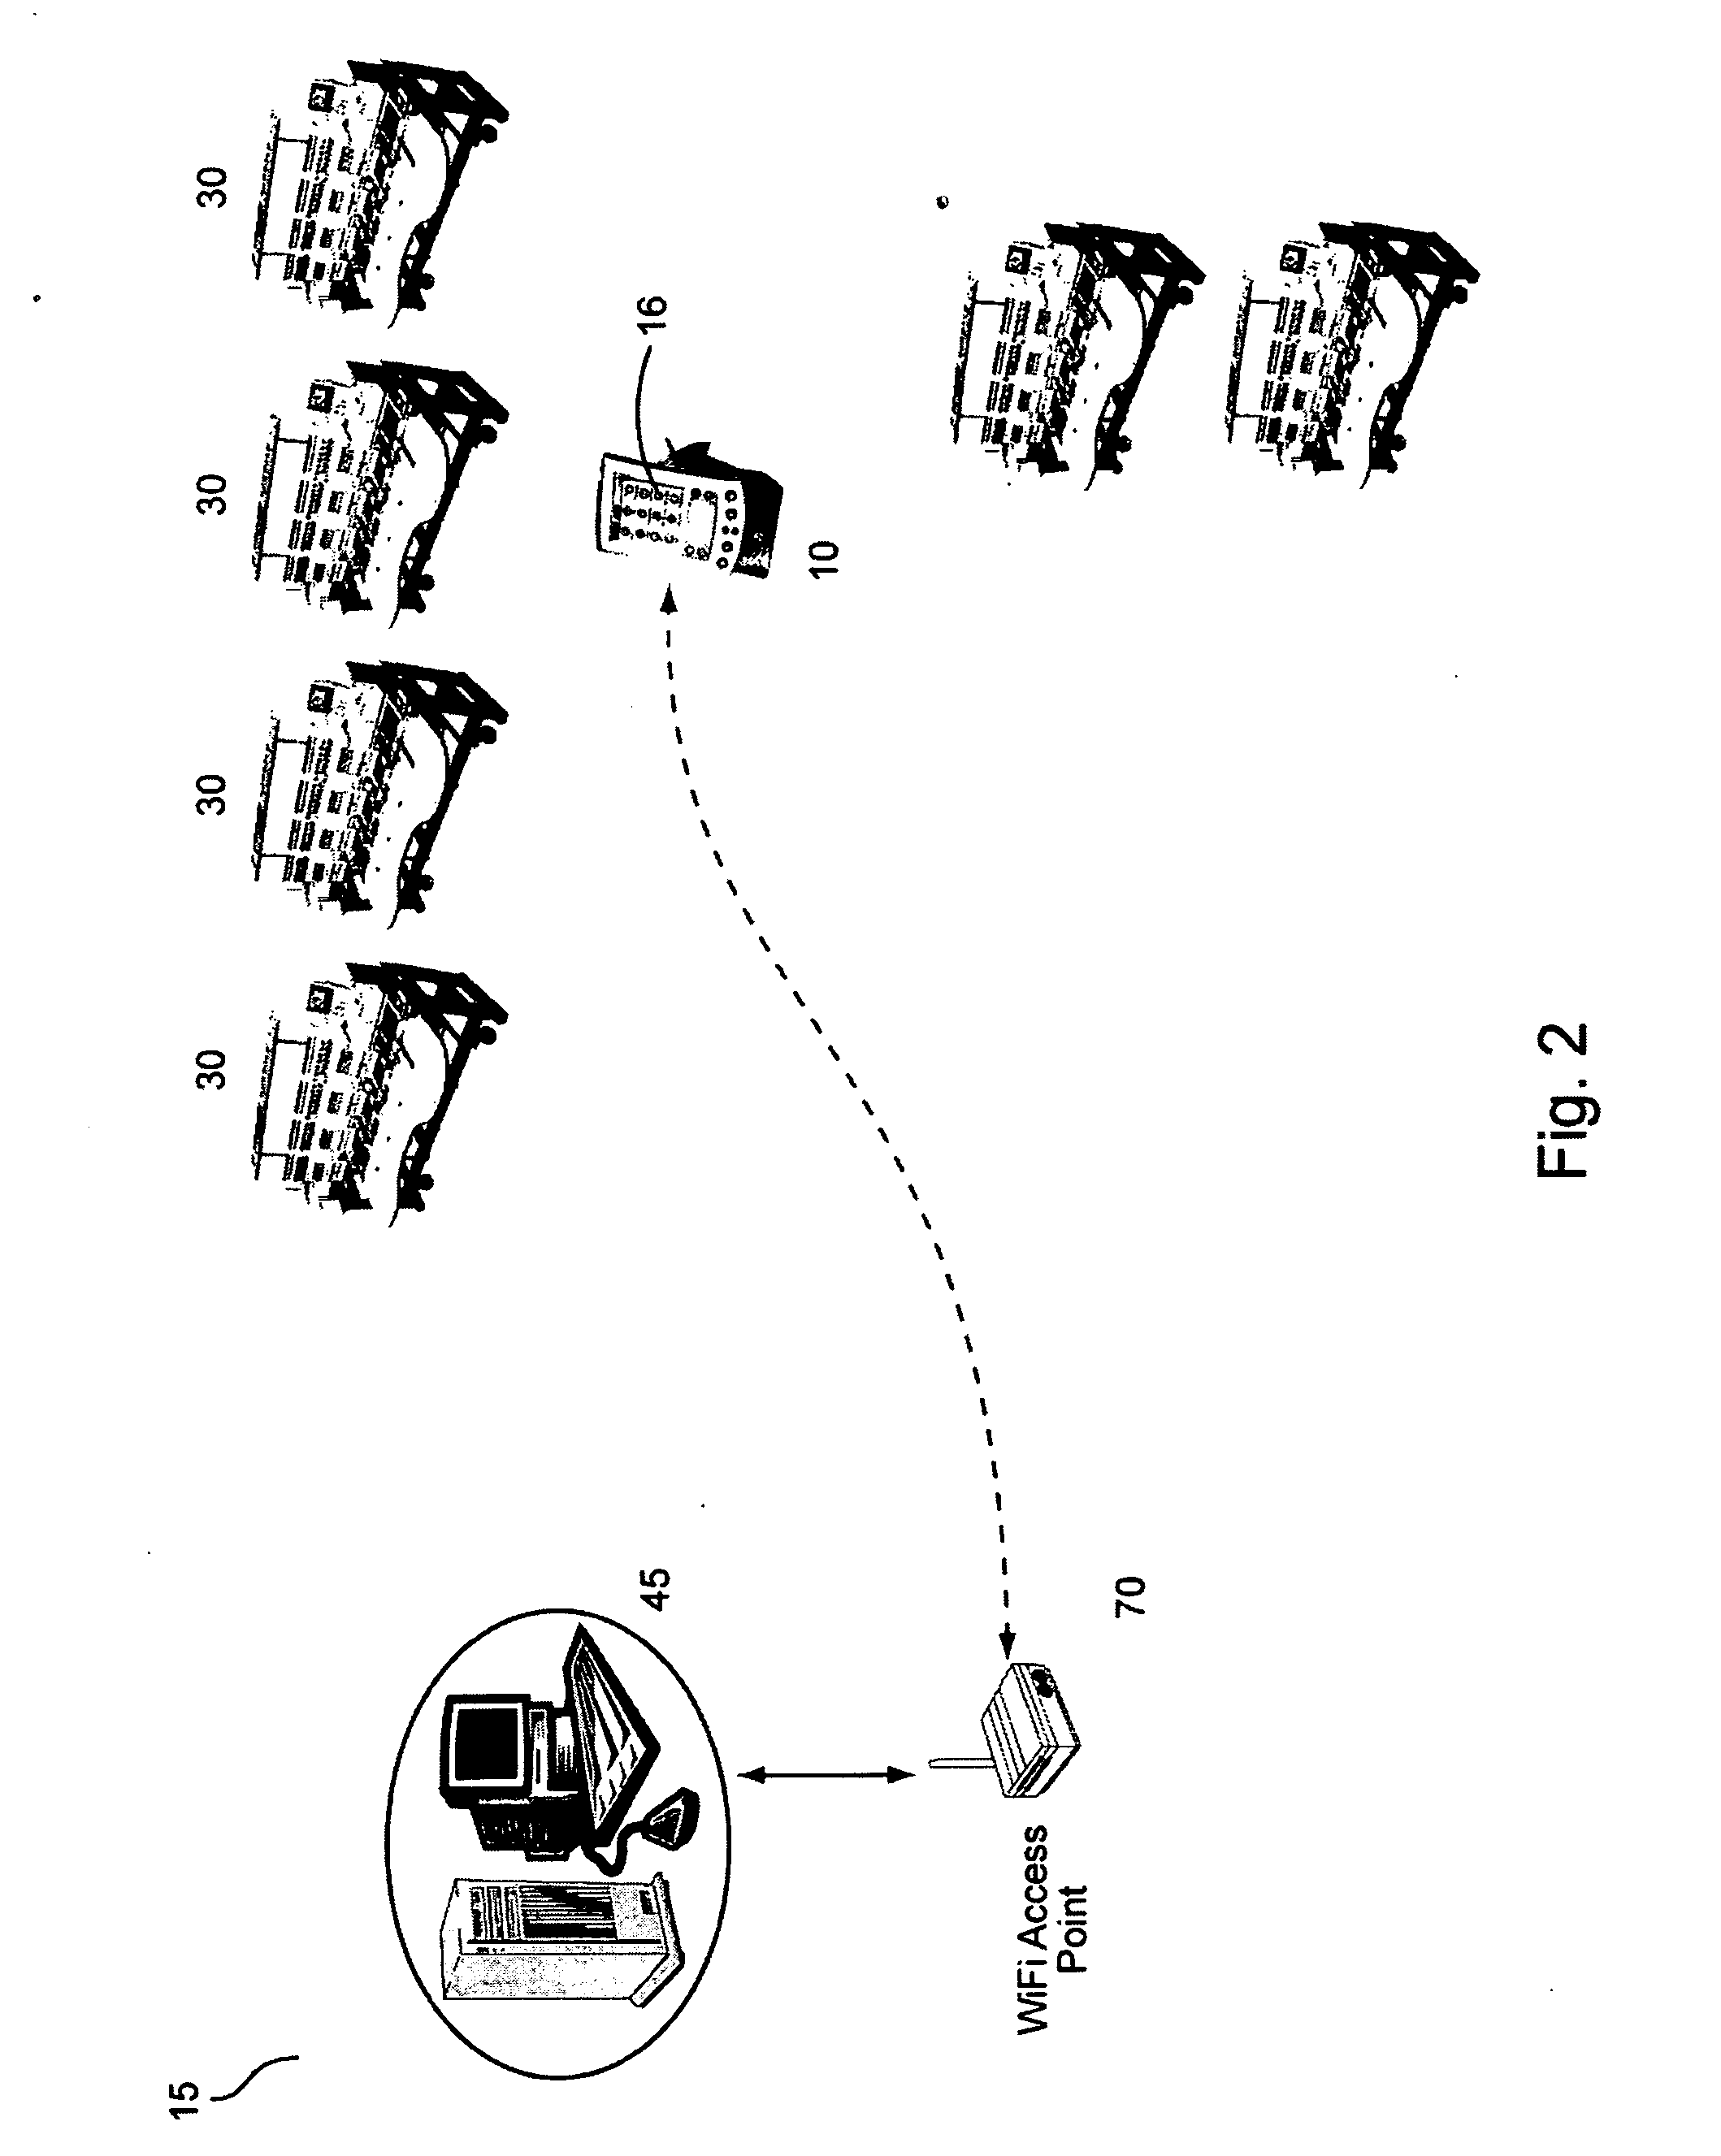 Embroidery network control system and method